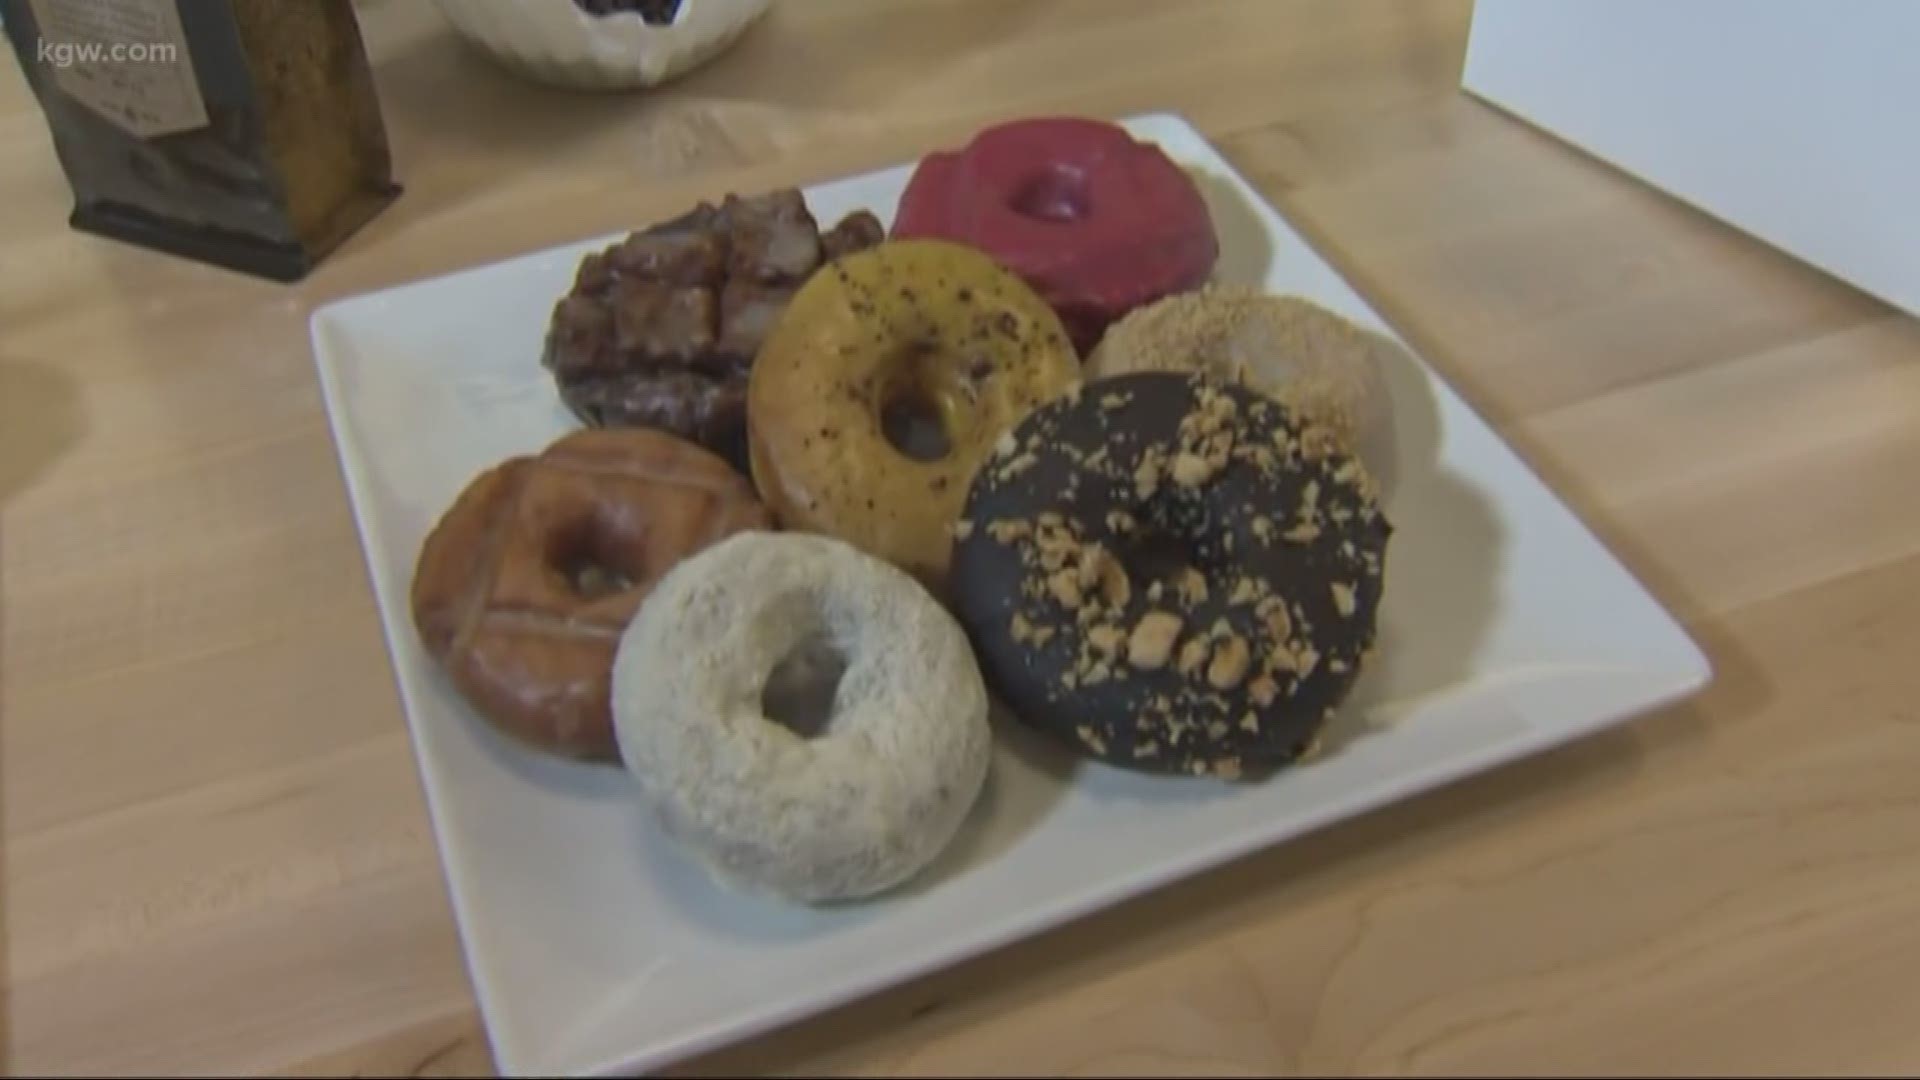 Blue Star Donuts opens location in Beaverton